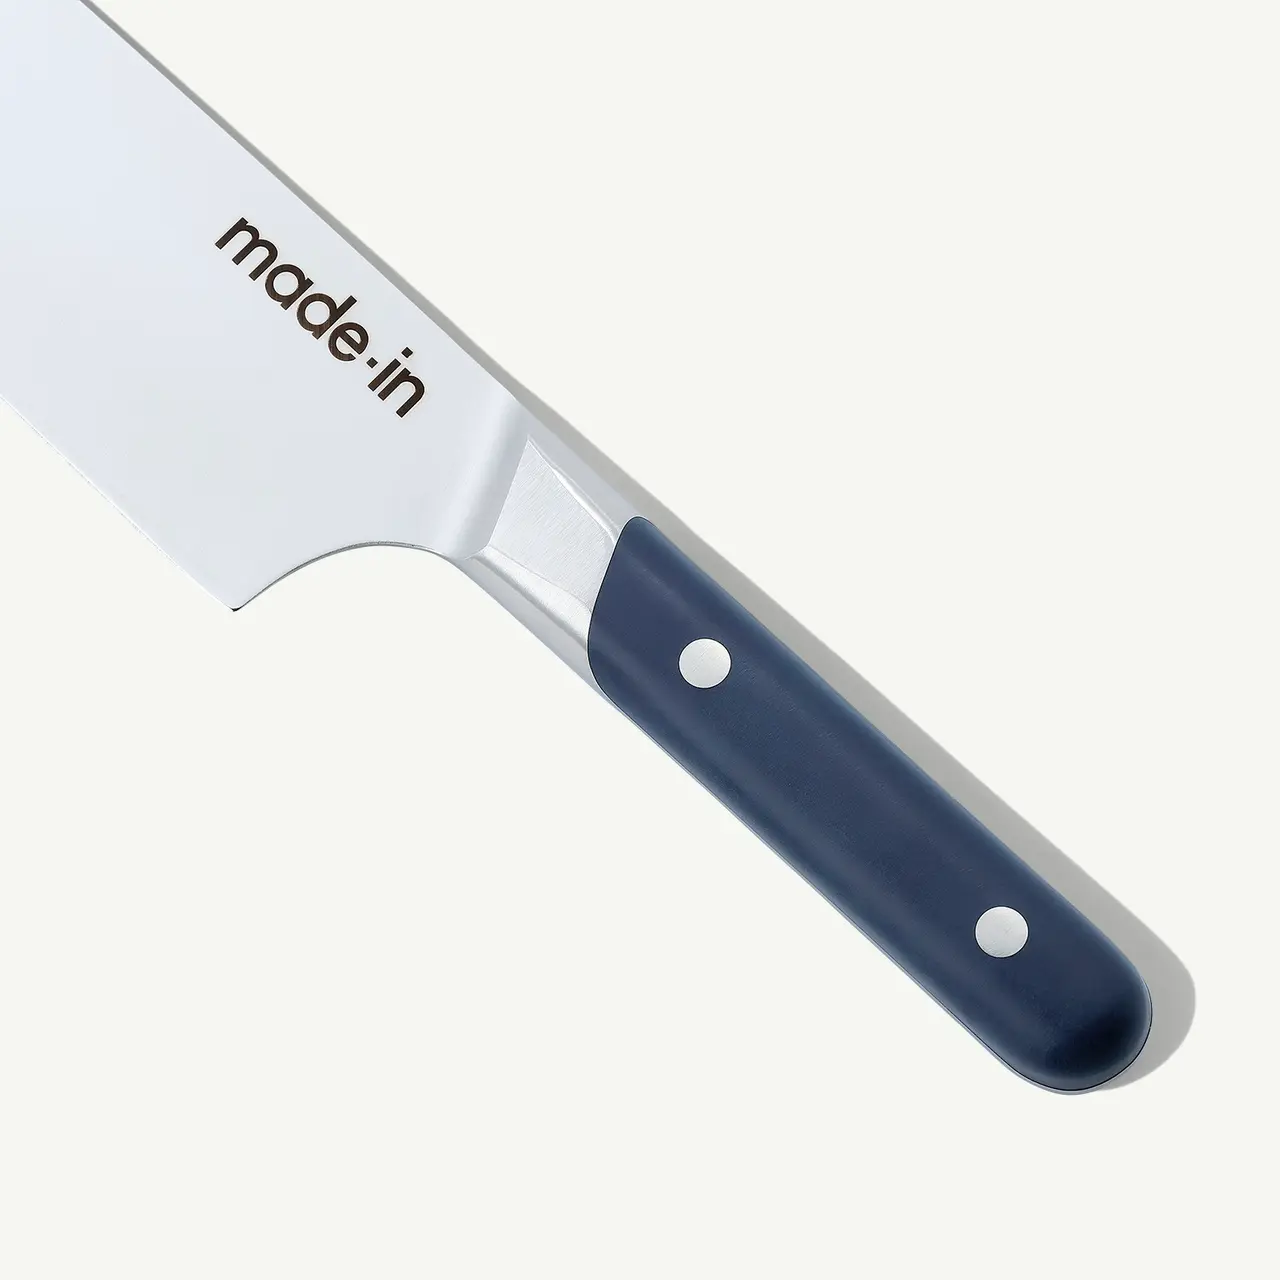 A close-up of a kitchen knife with a stainless steel blade and a navy blue handle, with "made in" branded on the blade.